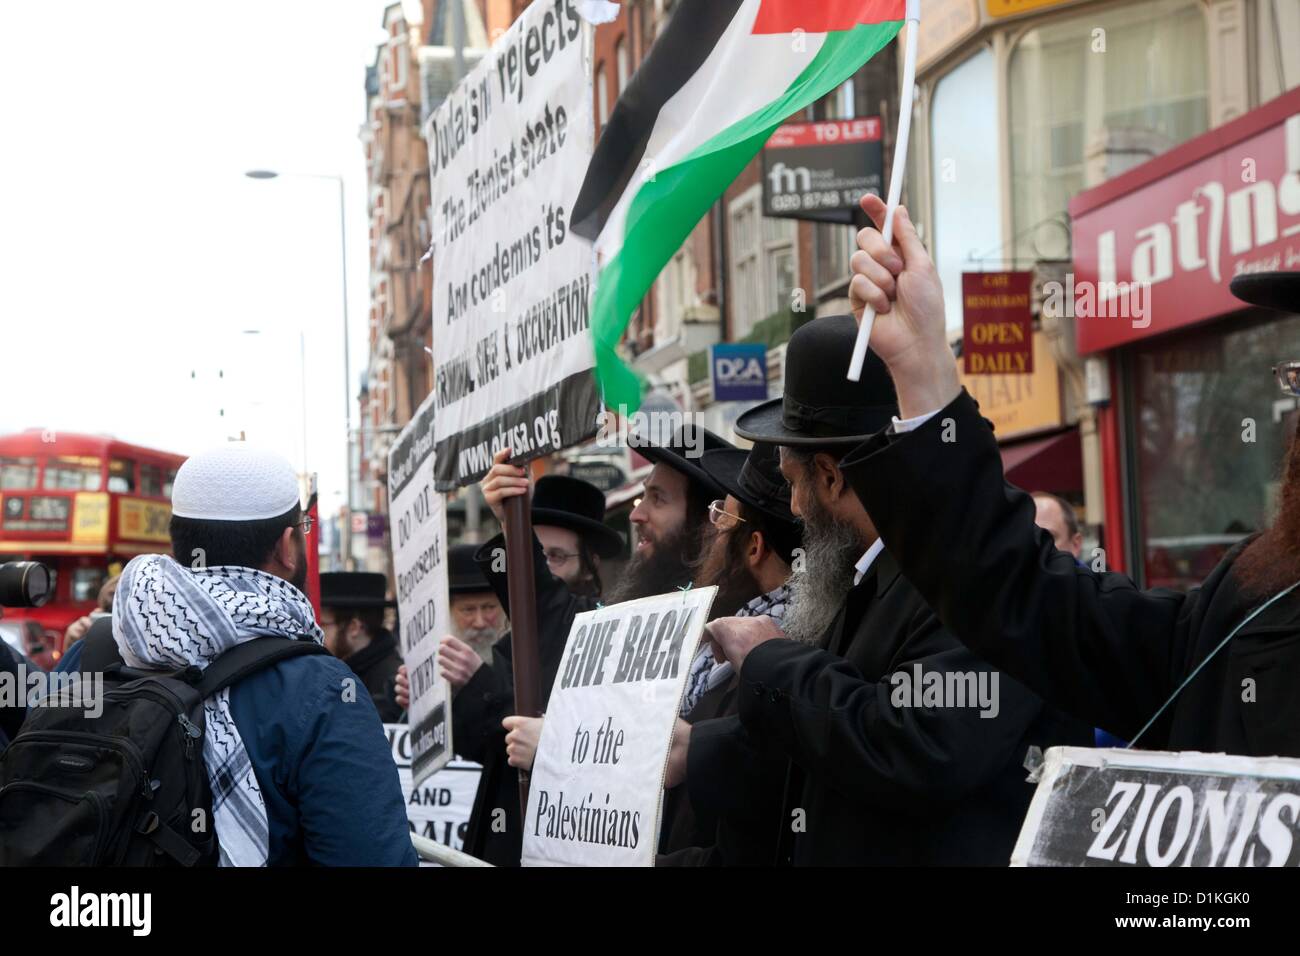 London, UK. 27 December 2012 Hasidic Jews joined the protest outside the Israeli Embassy. Stock Photo